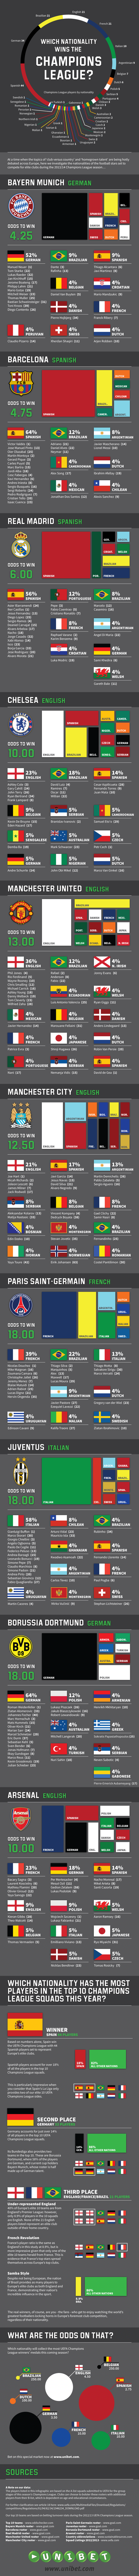 Which Nationality Wins The Champions League